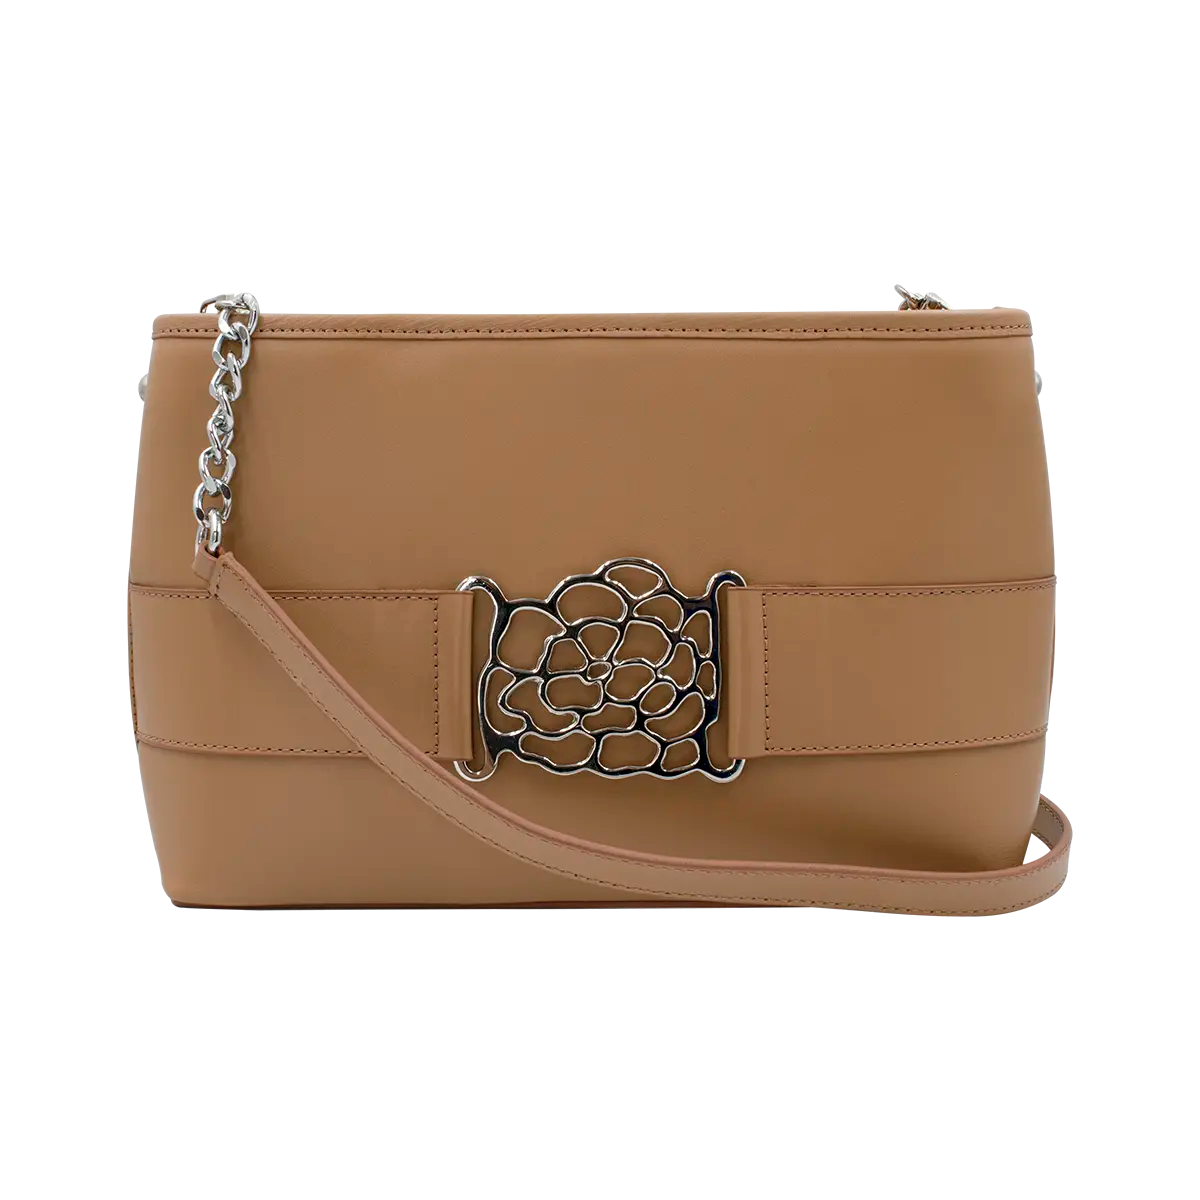 small tan leather shoulder bag with metal accent. Fashion accessory for women in San Diego, CA.